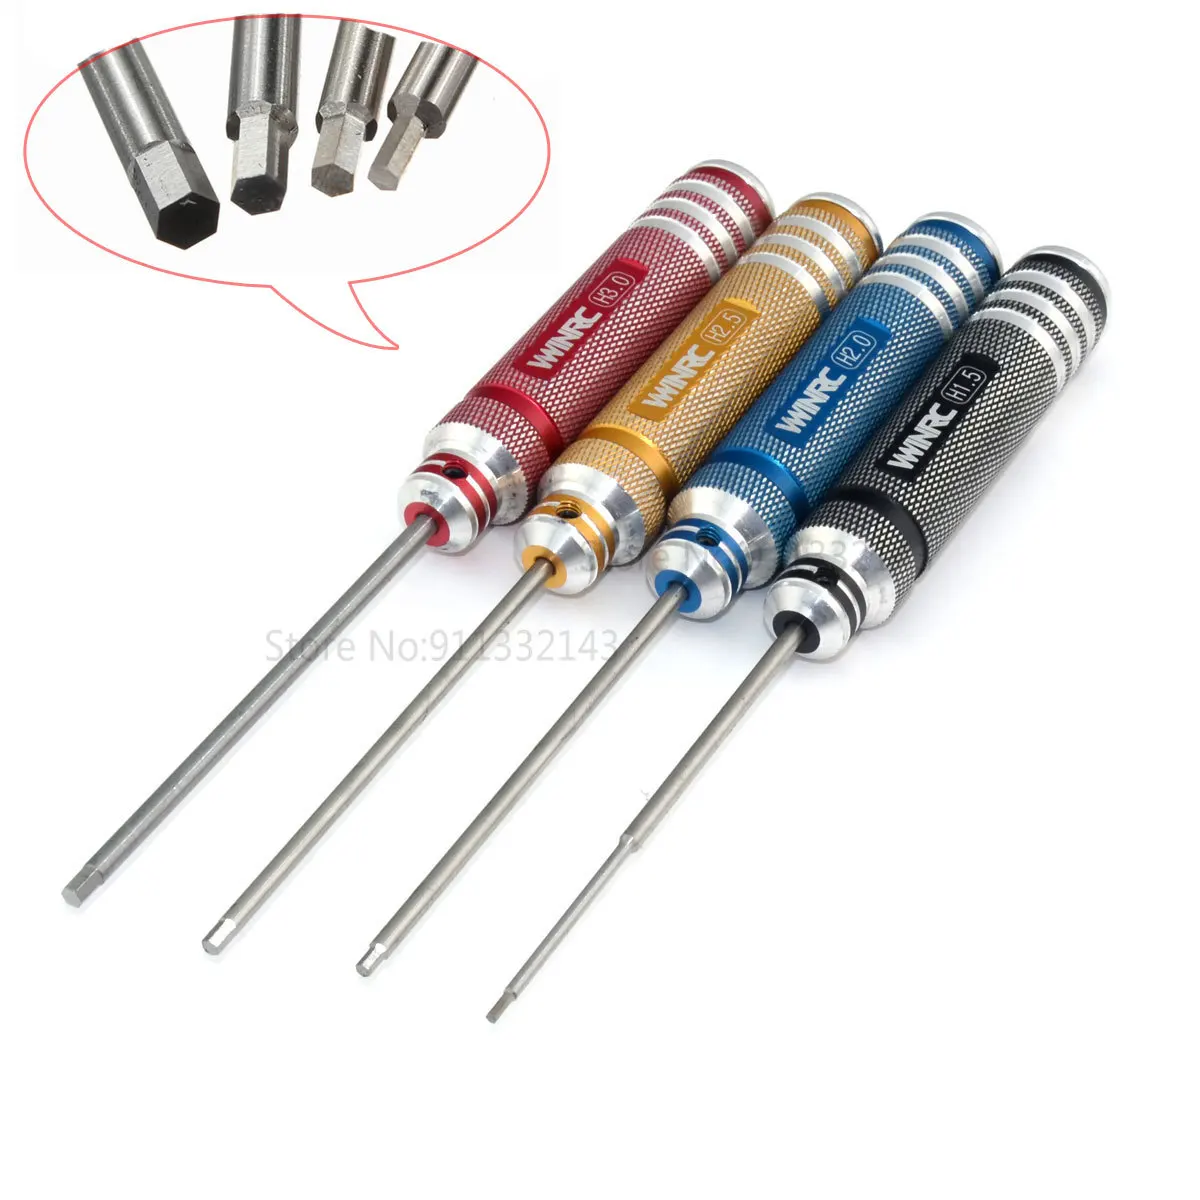 

Hex Screwdriver Set 1.5 2.0 2.5 3.0mm Screw Driver For RC Car Helicopter Toys Quadcopter Multi-Axis FPV Drone Tools